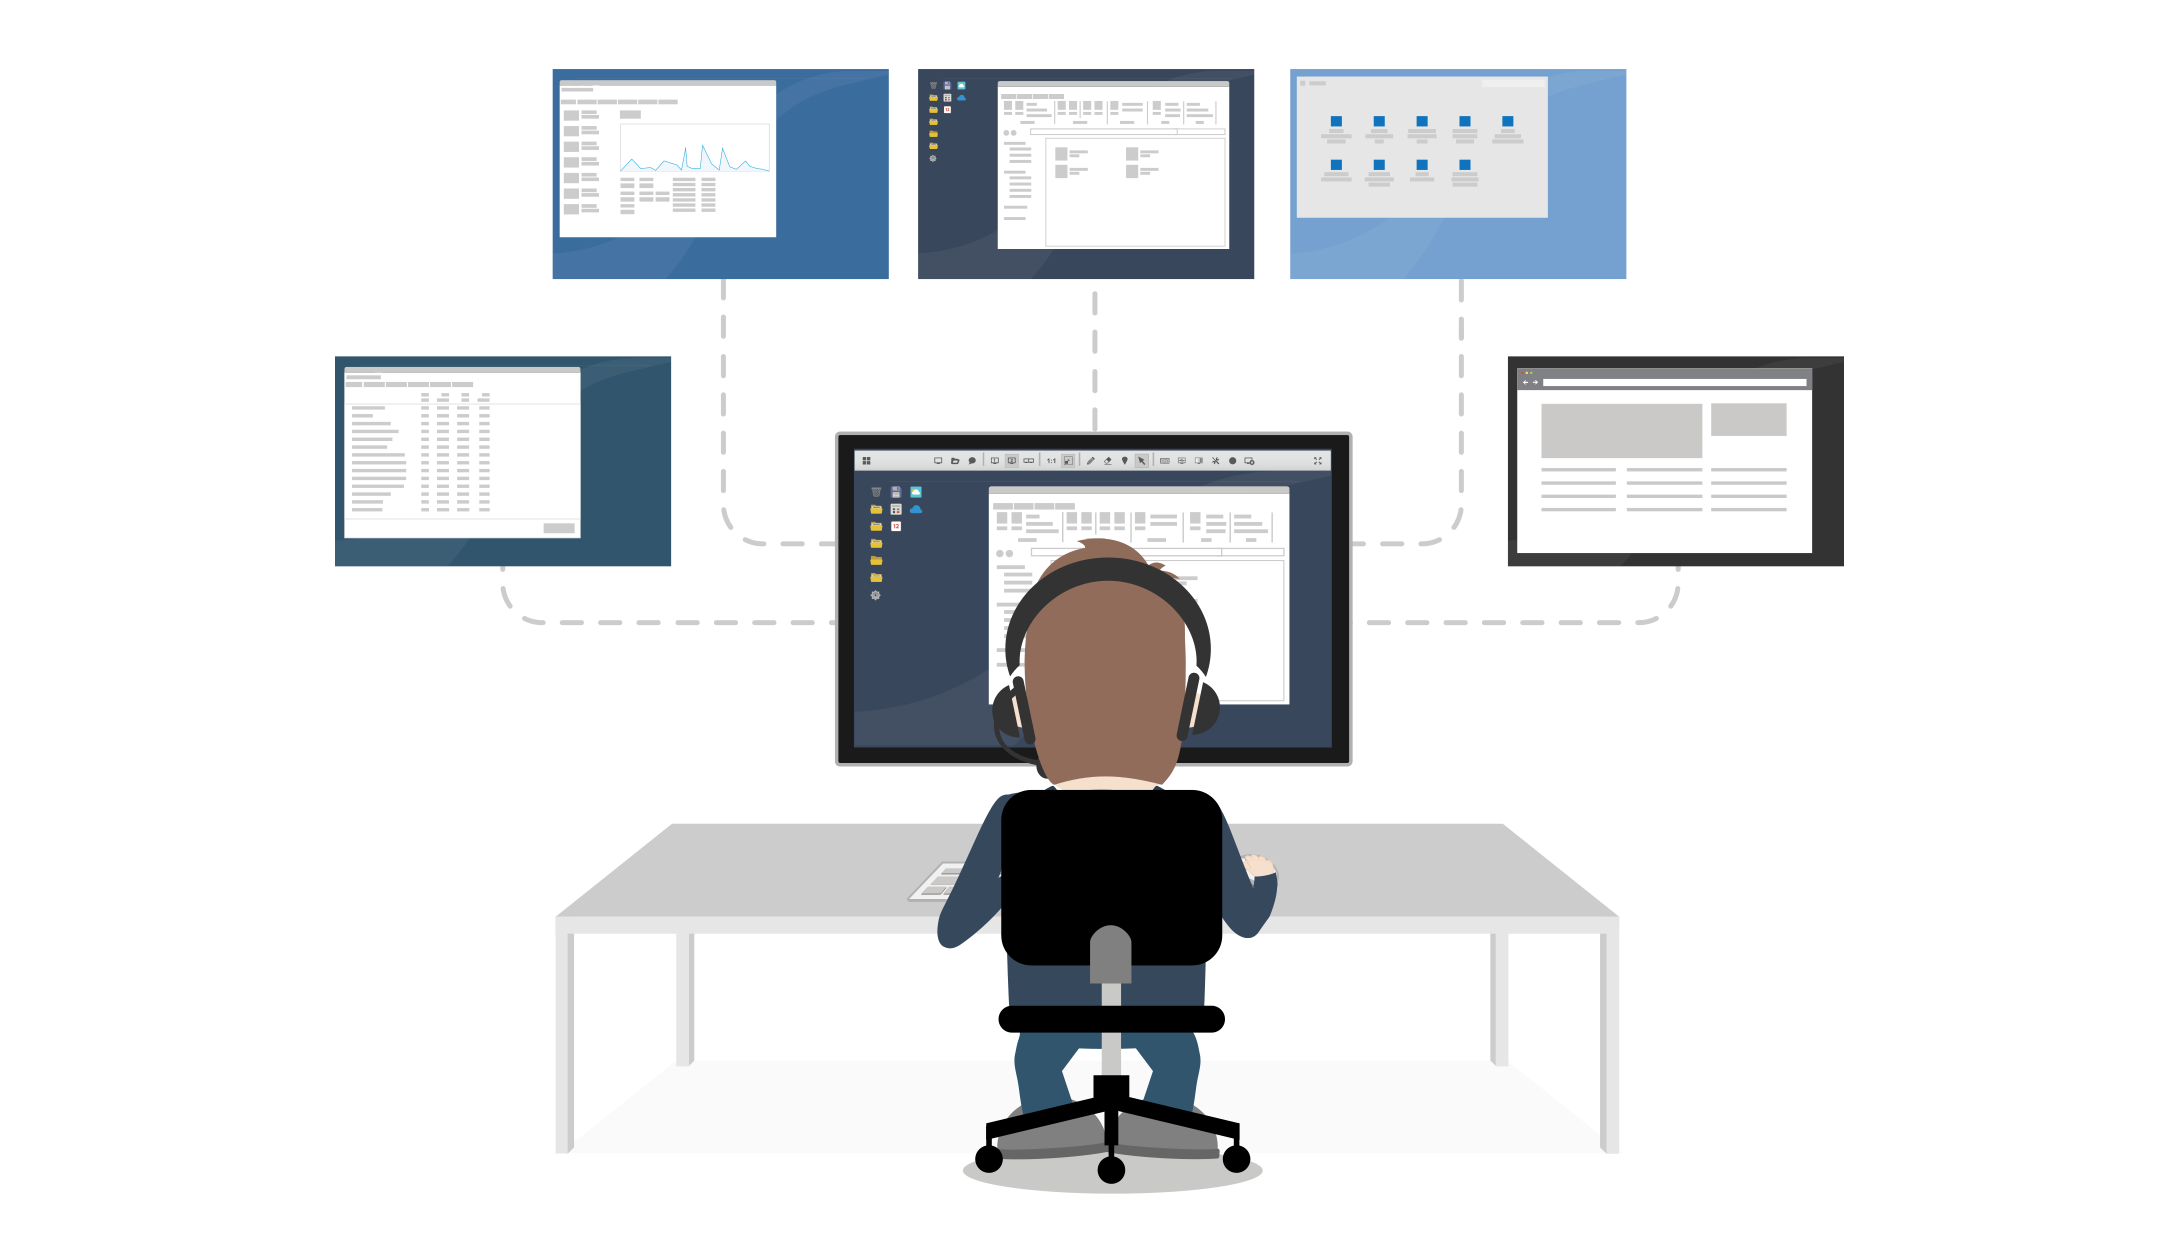 Remote desktop software allows you to control remote computers and mobile devices anywhere in the world from your office.